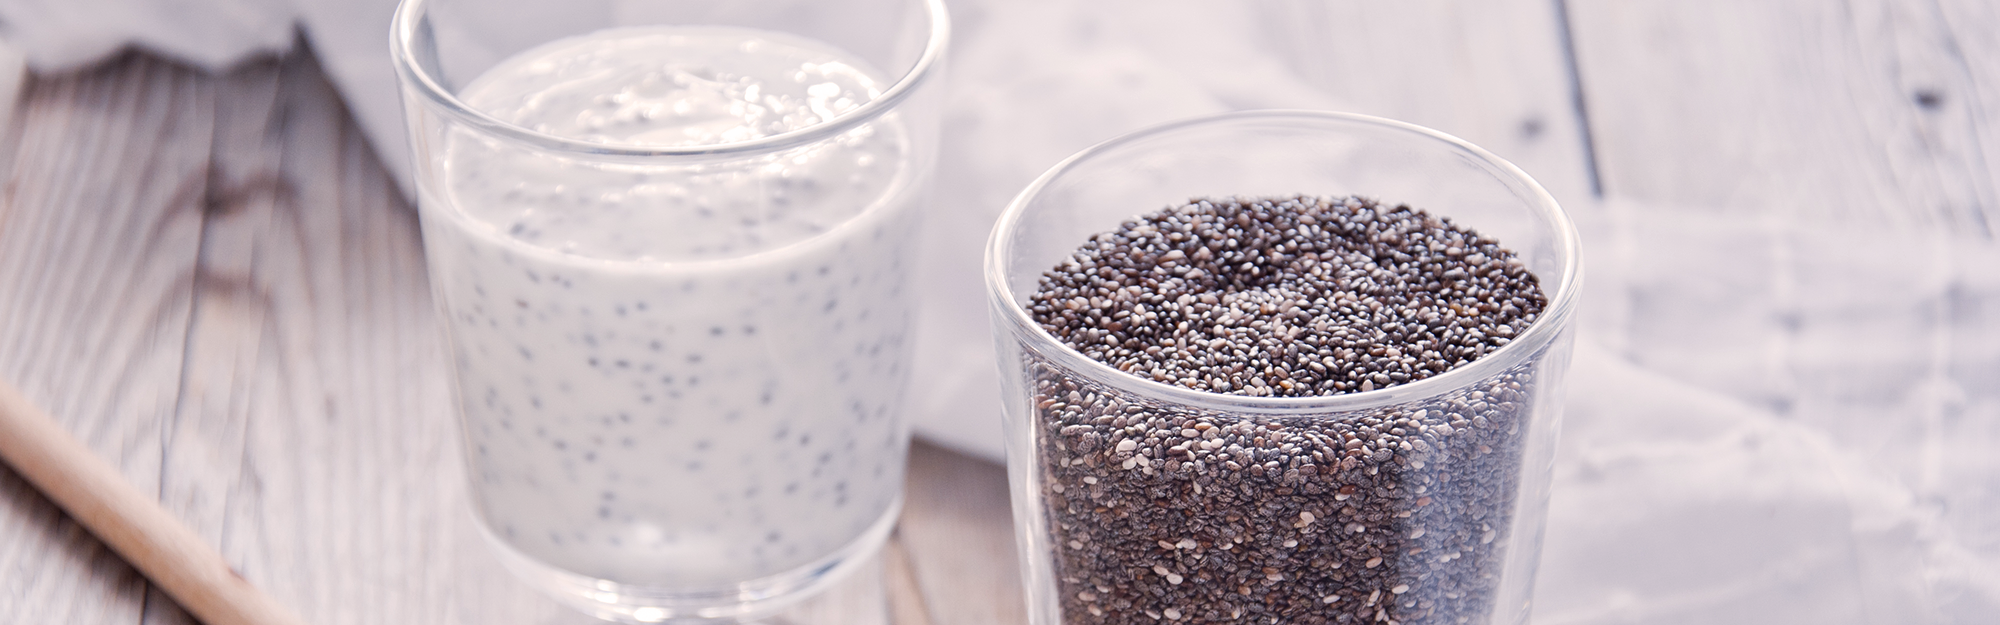 Get your chia on!